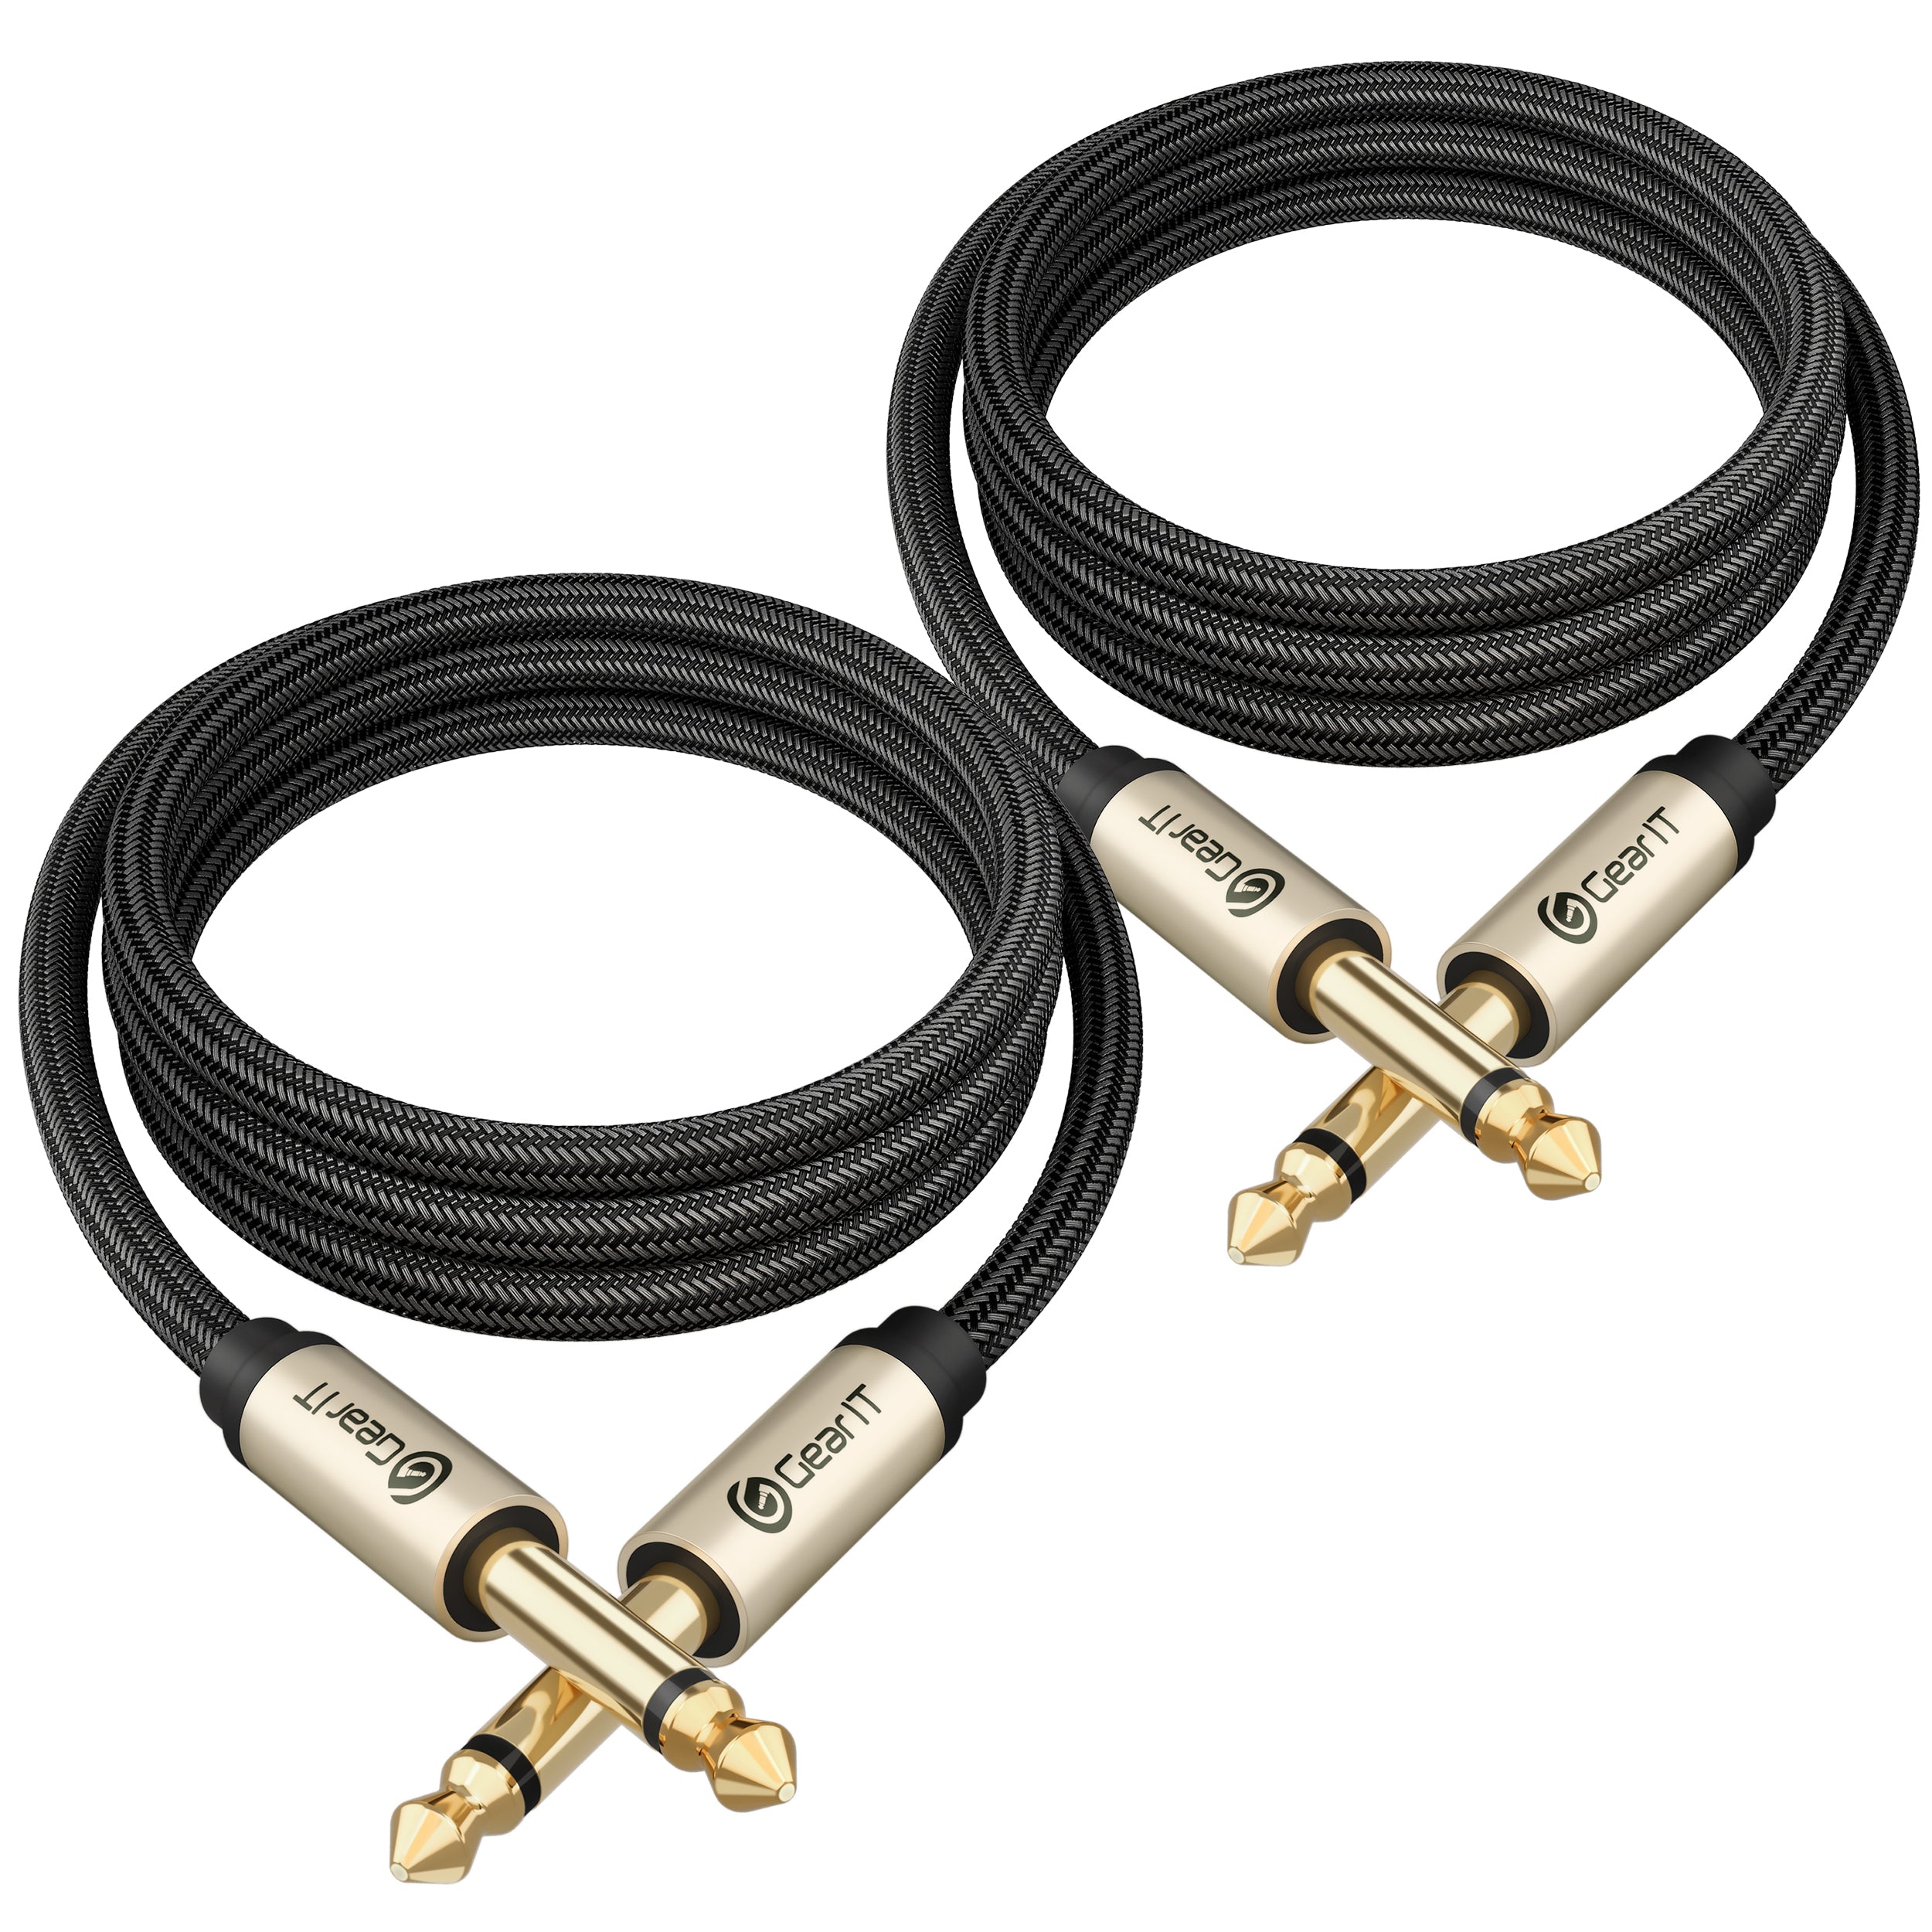 GearIT Guitar Instrument Cable - Nylon Braided 1/4...